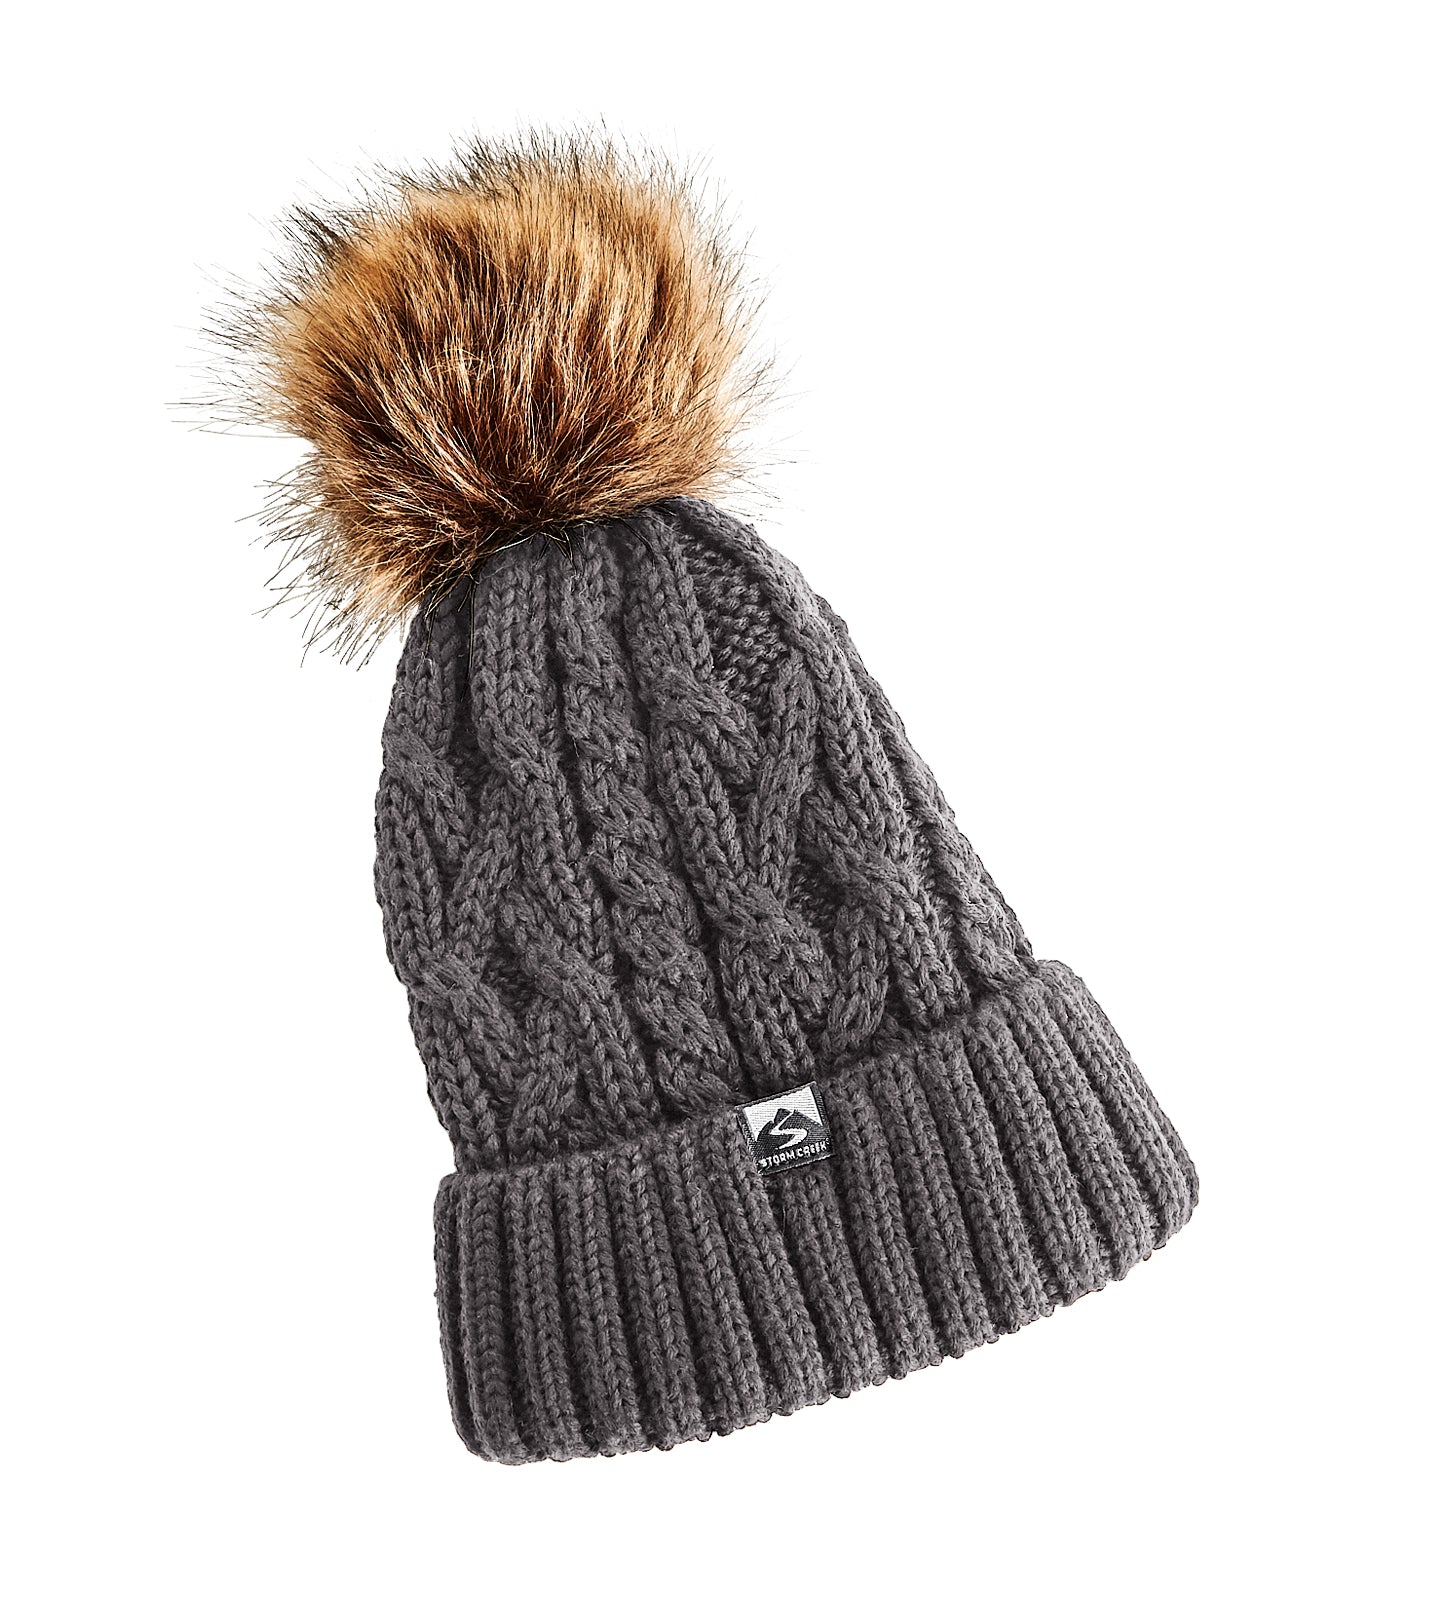 Storm Creek 1030 - The Show-Off Pom Hat